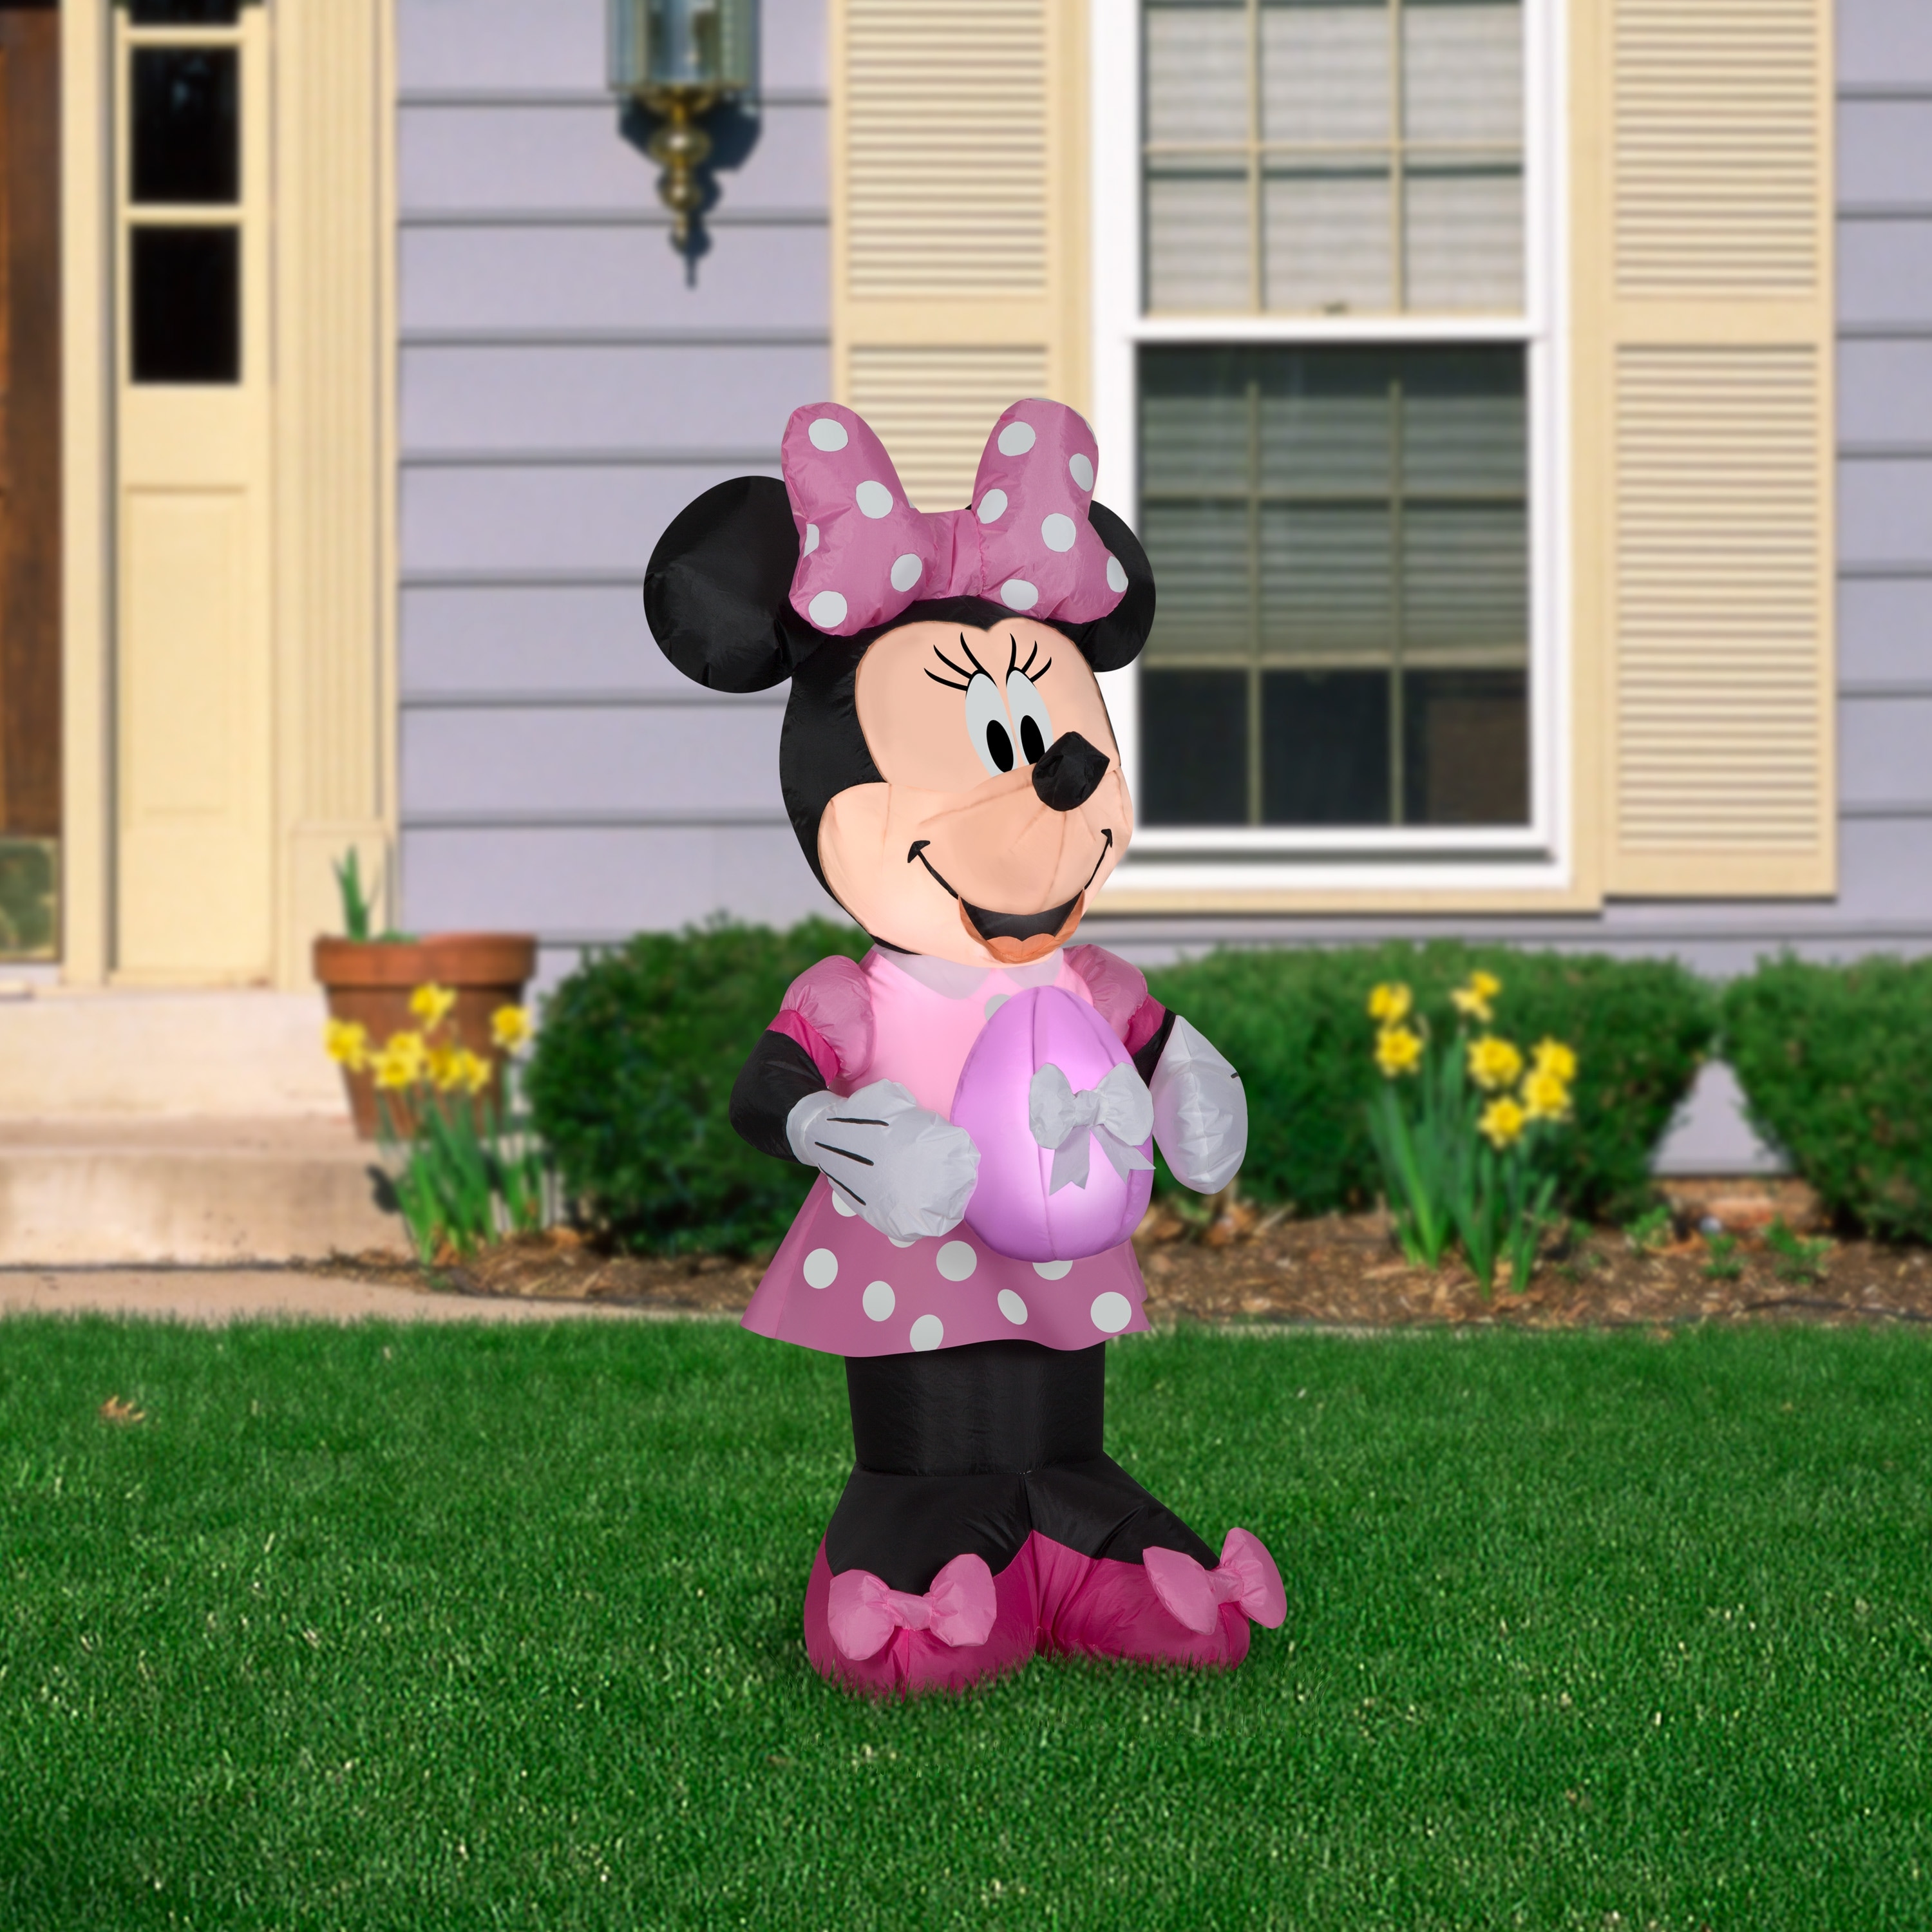 https://ak1.ostkcdn.com/images/products/is/images/direct/25f7408aba980bf07105e2d6d9fc32cc22e6fddf/Gemmy-Airblown-Inflatable-Minnie-Mouse-in-Pink-Polka-Dot-Easter-Dress%2C-3.5-ft-Tall%2C-pink.jpg